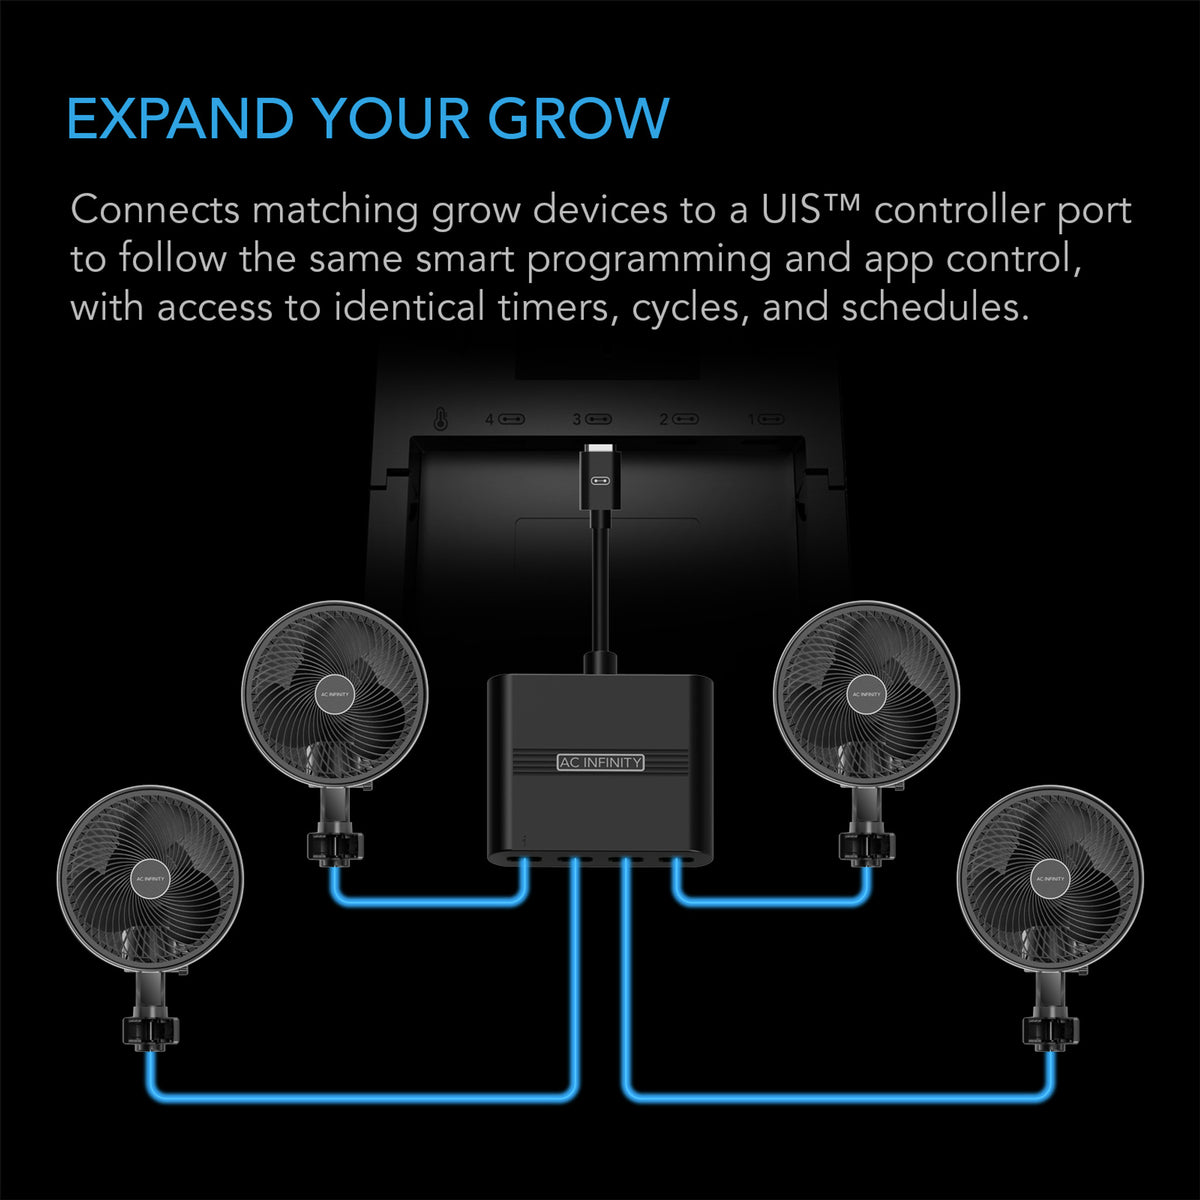 Expand your grow without more controllers